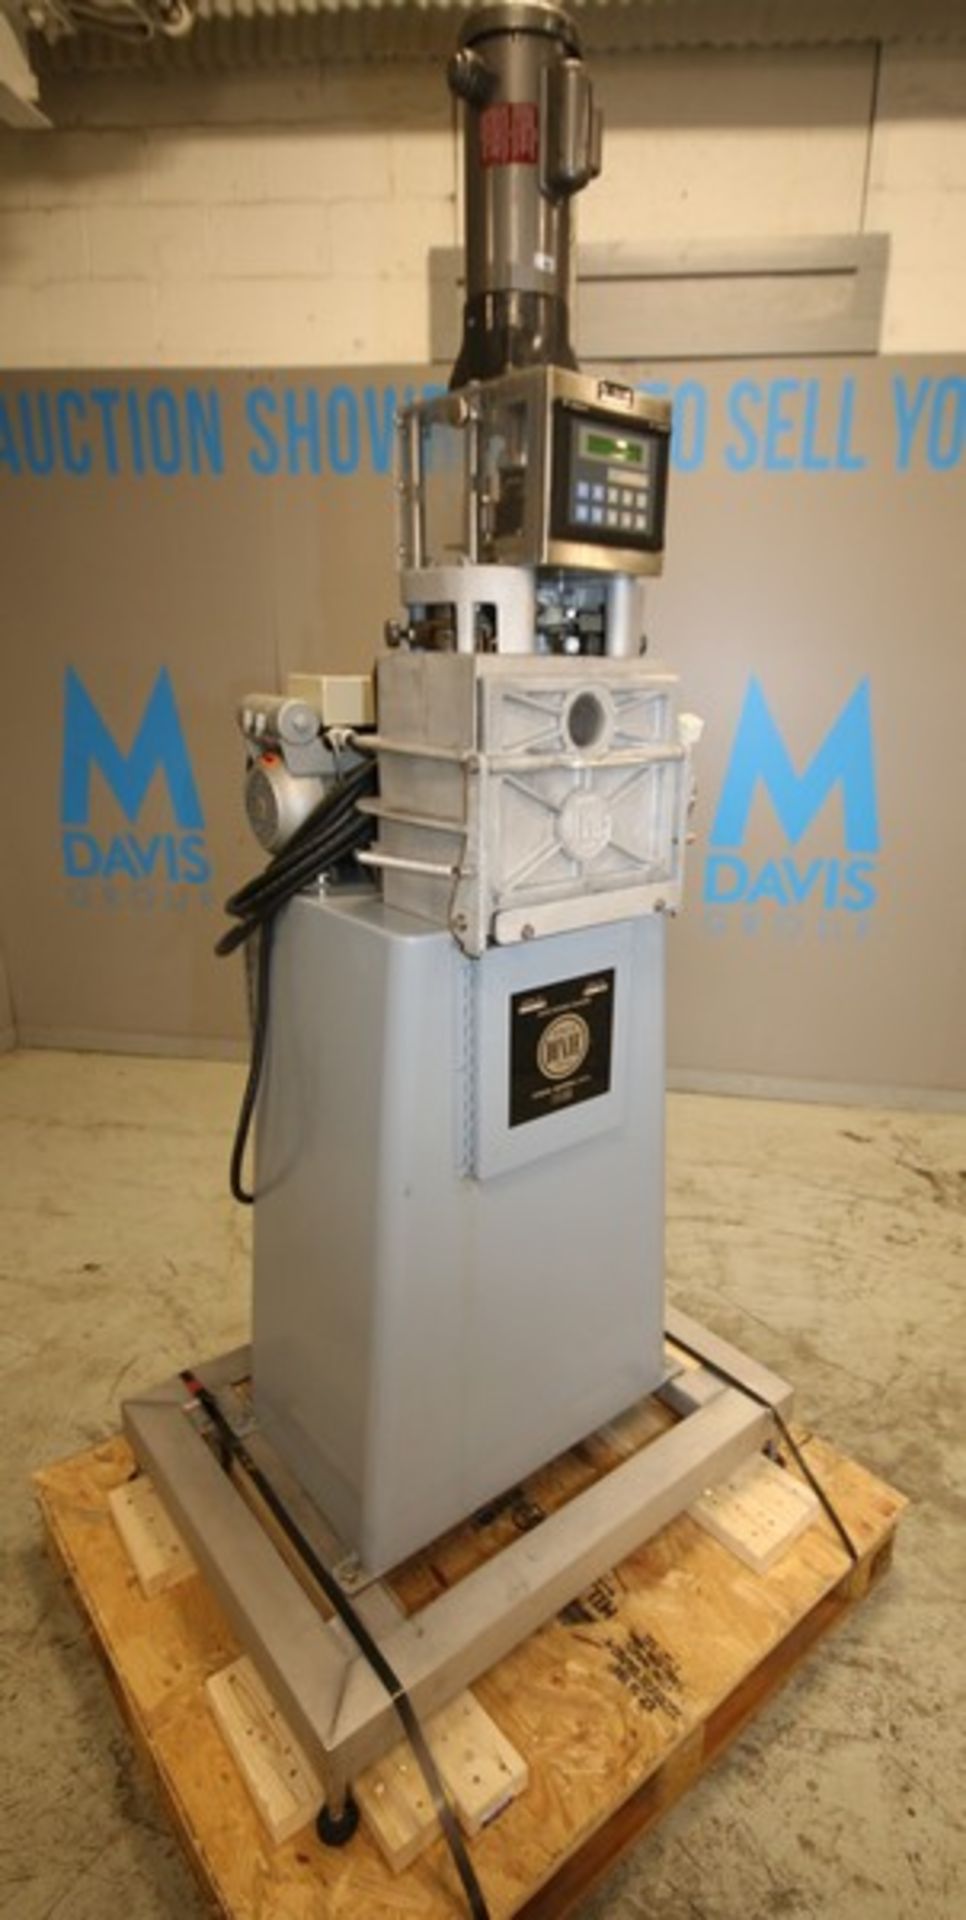 Dixie Double Can Seamer, Model UVGMD-ALCC, SN 95166, Busch On Board Vacuum Pump, 110/115V, Idec - Image 4 of 14